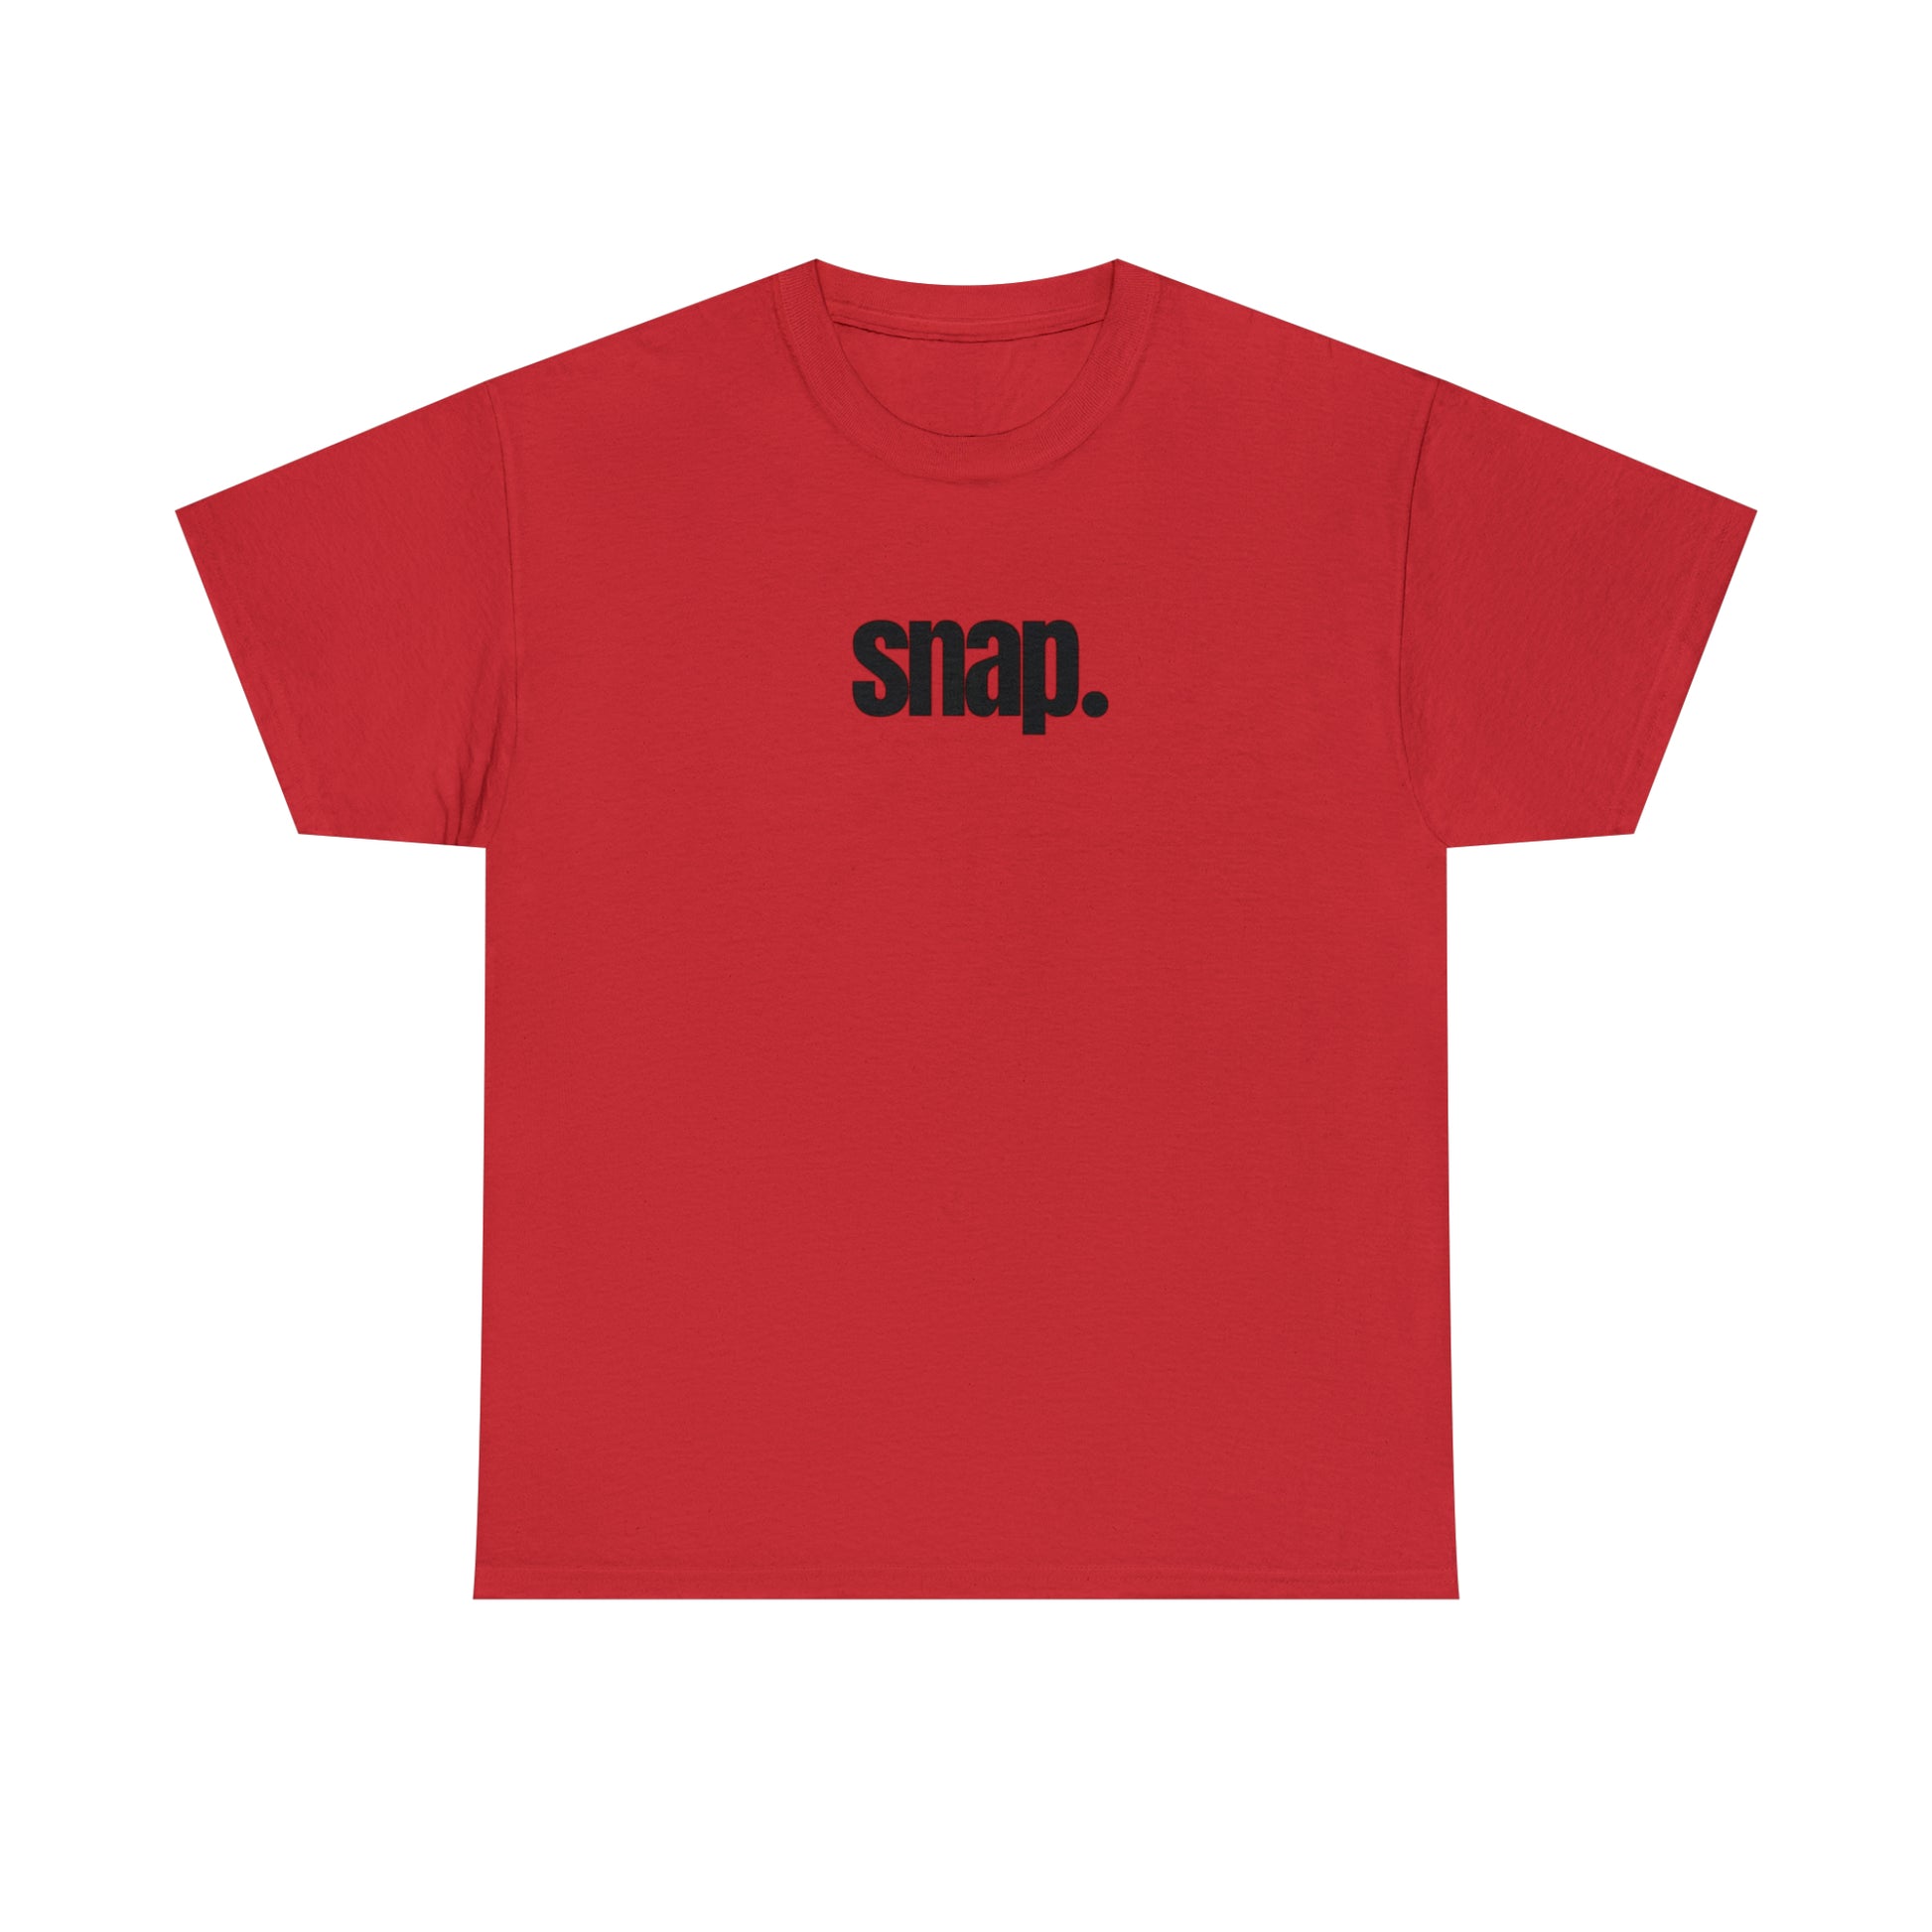 Vintage Snappin "Snap." Red T-Shirt